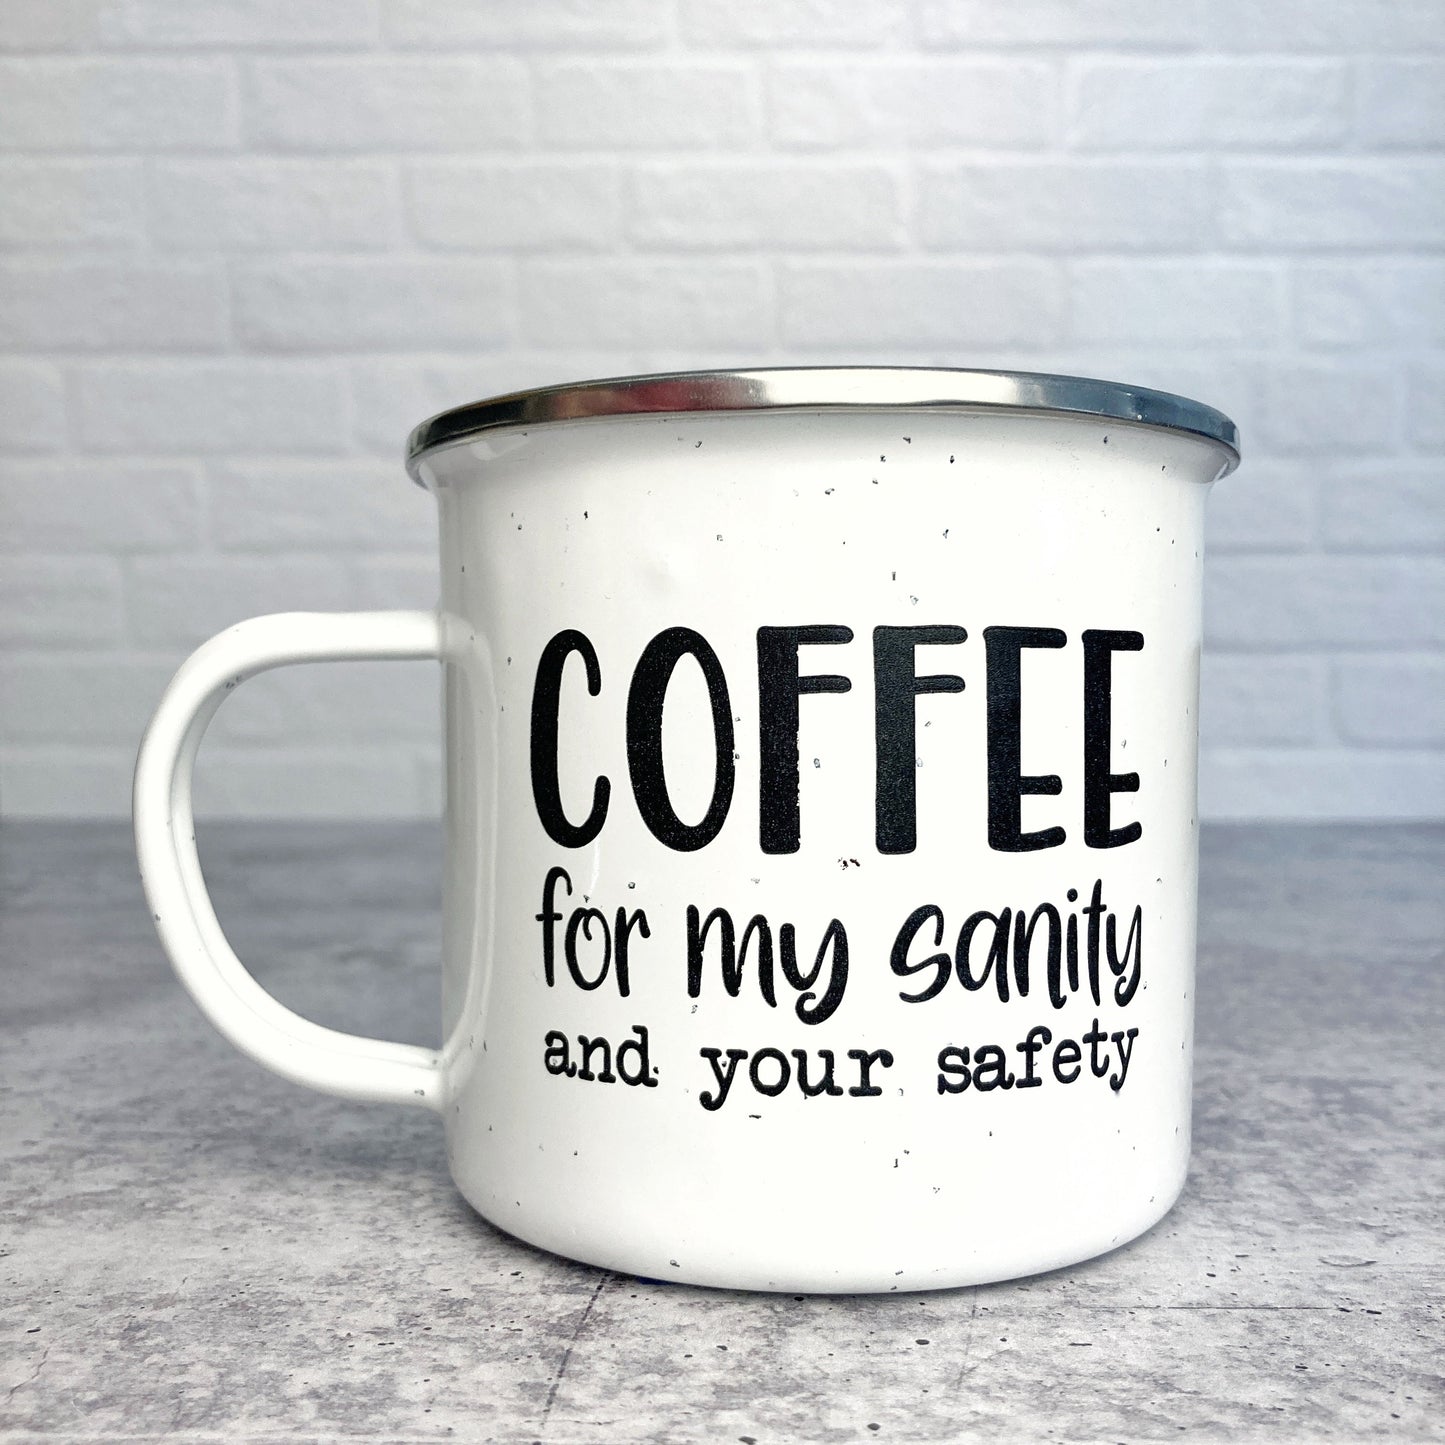 Coffee For My Sanity and your safety design on a white enamel mug